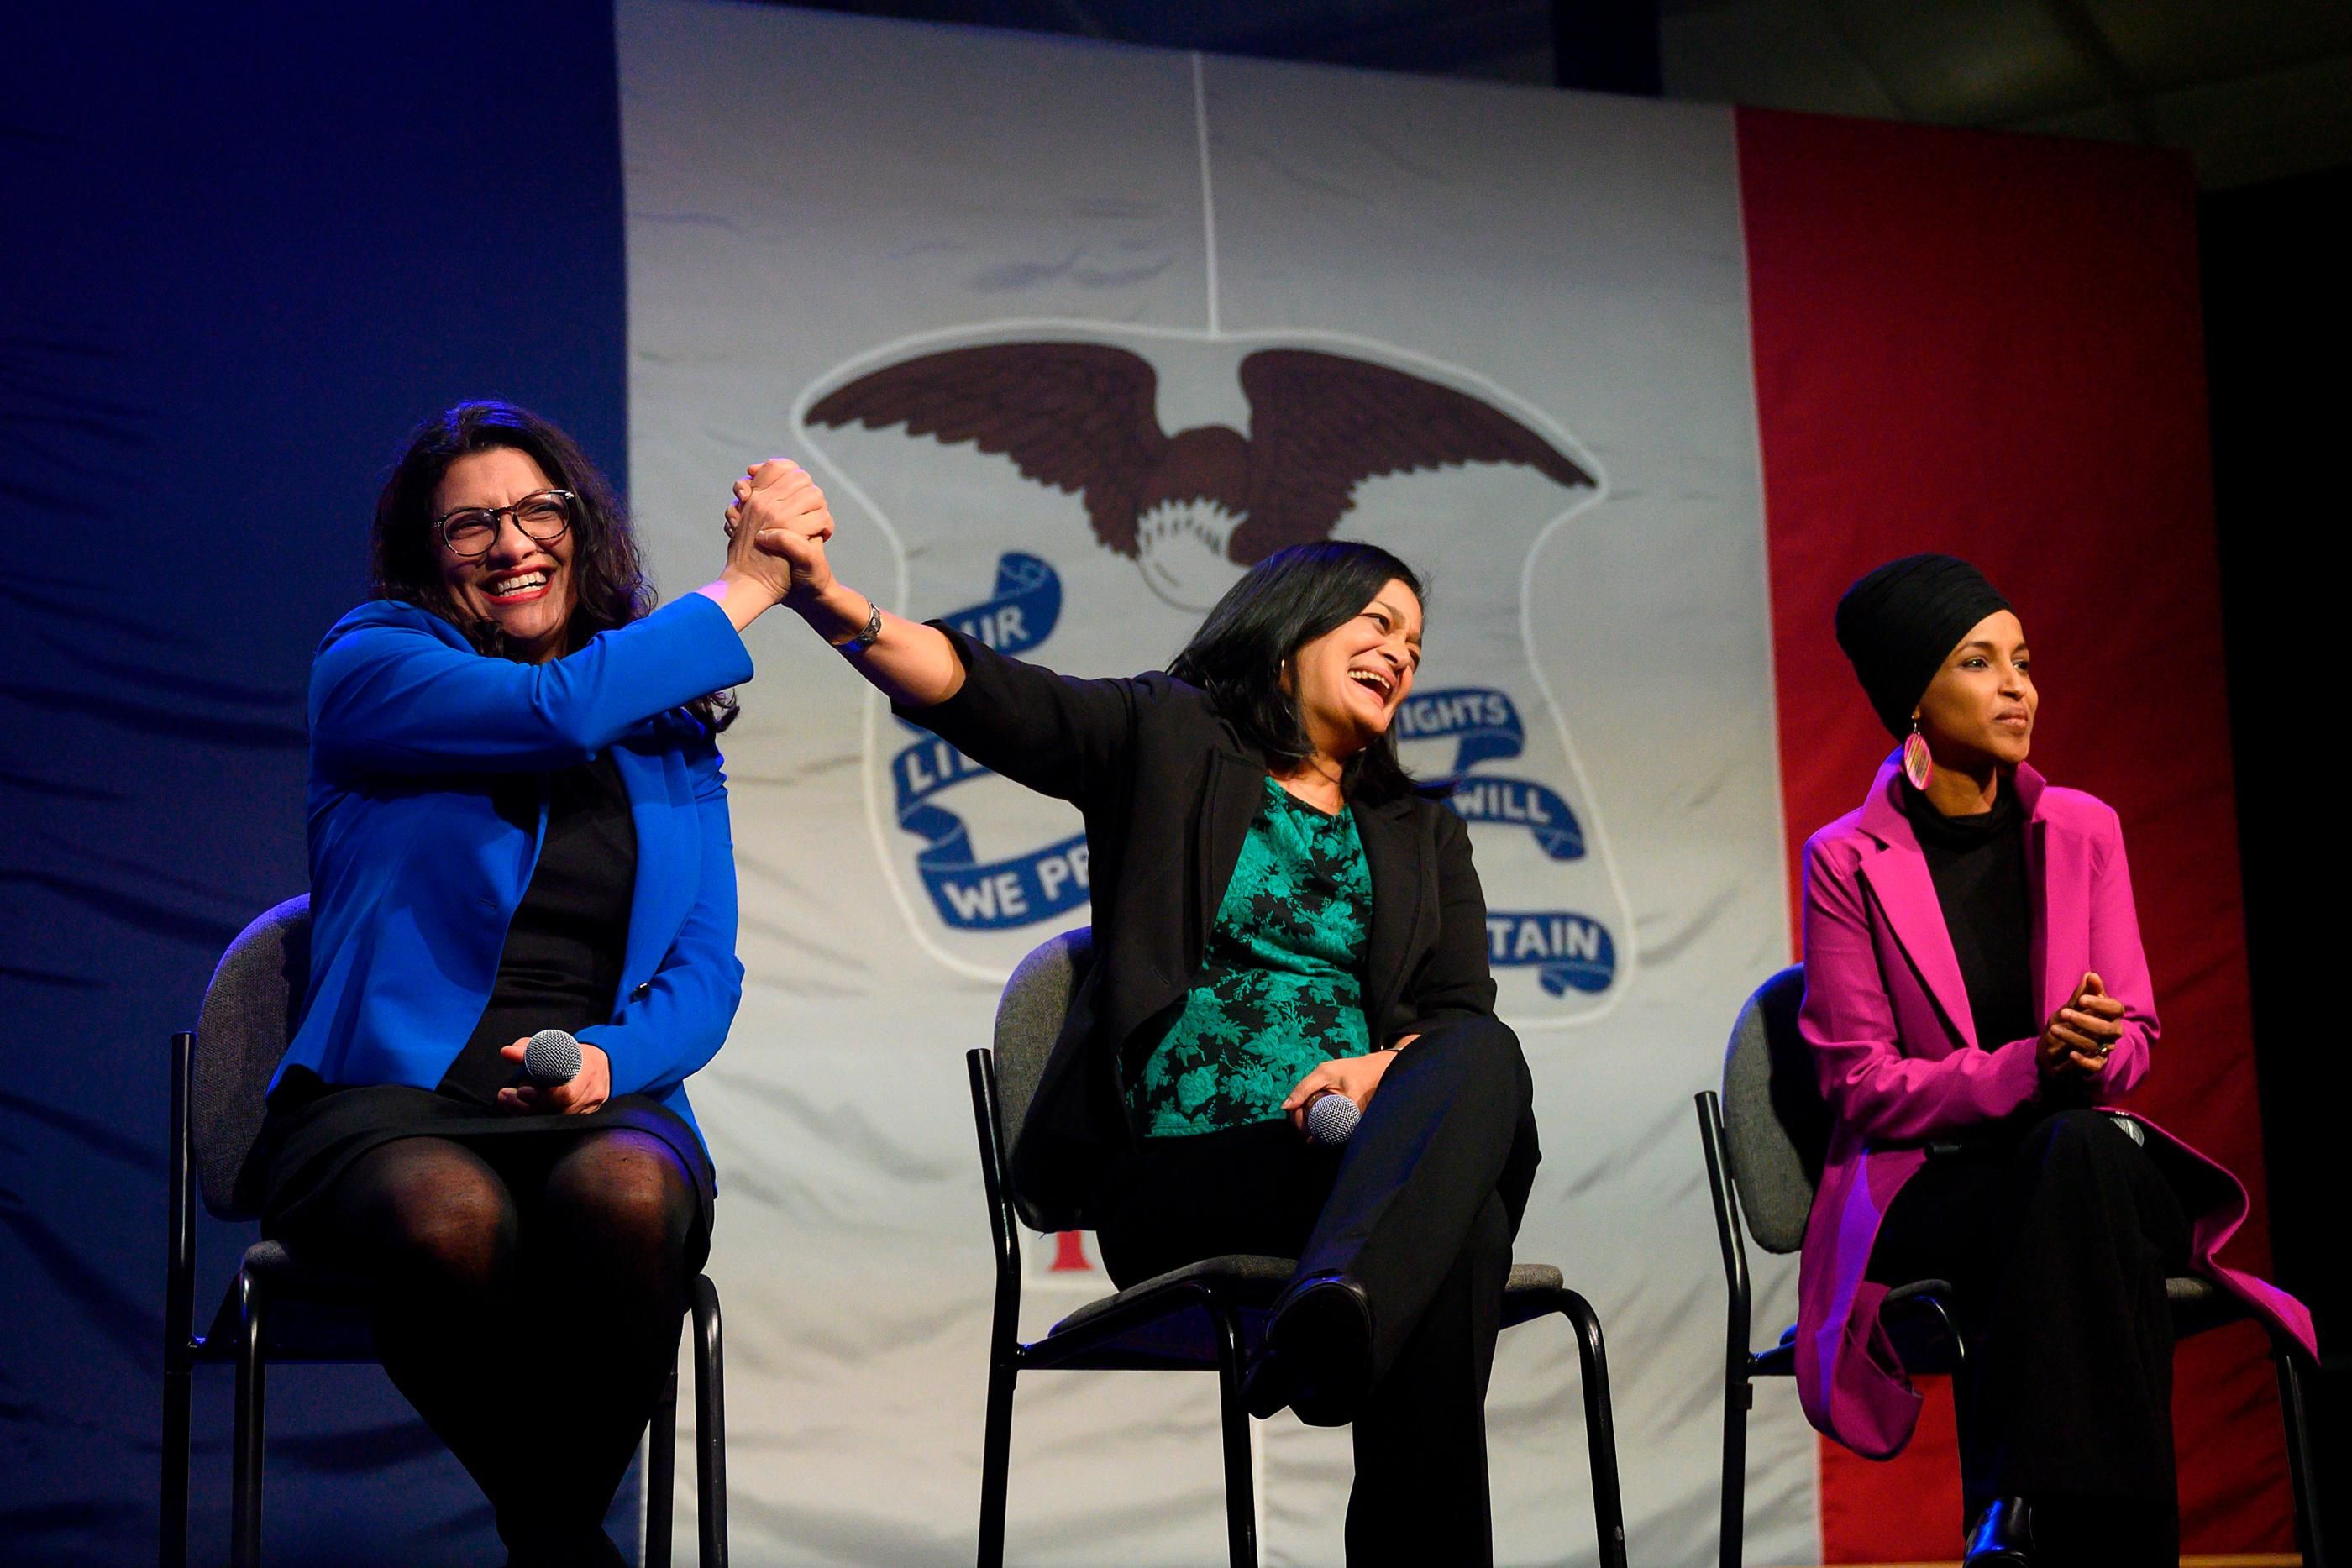 From left to right: Reps. Rashida Tlaib (D-Mich.), Pramila Jayapal (D-Wash.), and Ilhan Omar (D-Minn.) speak to supporters of then-Democratic presidential candidate Sen. Bernie Sanders (I-Vt.) at a campaign event in Clive, Iowa, on January 31, 2020. (Photo: Jim Watson/AFP via Getty Images)